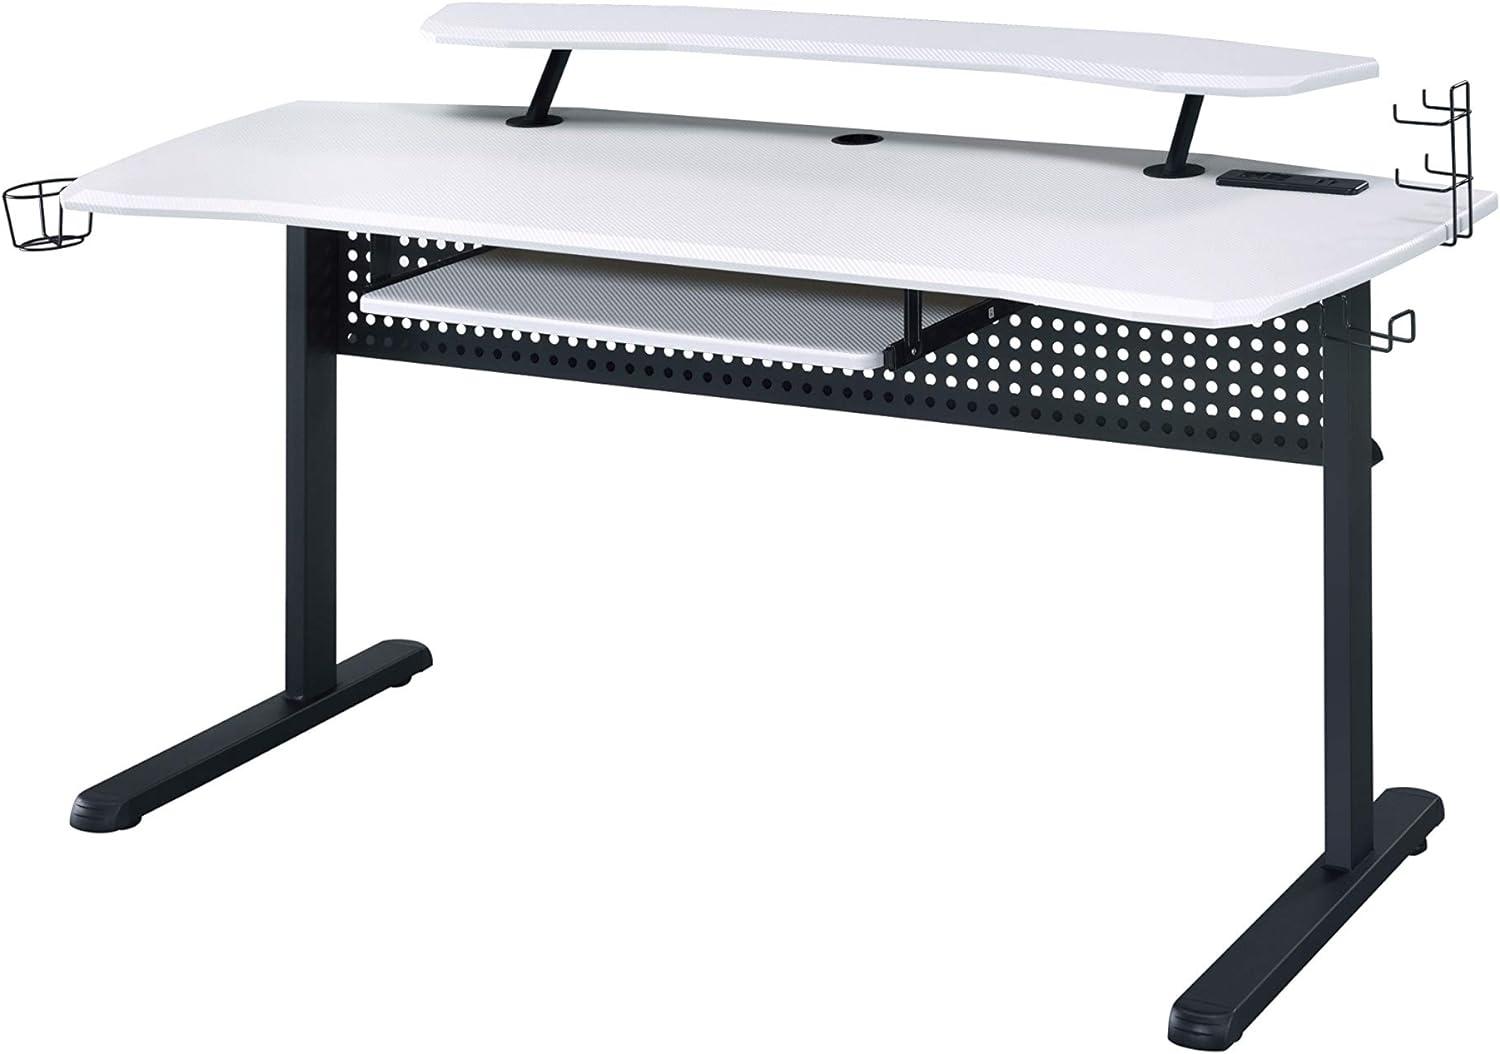 Ultimate Black Gaming Desk with Hutch, USB & Power Outlets